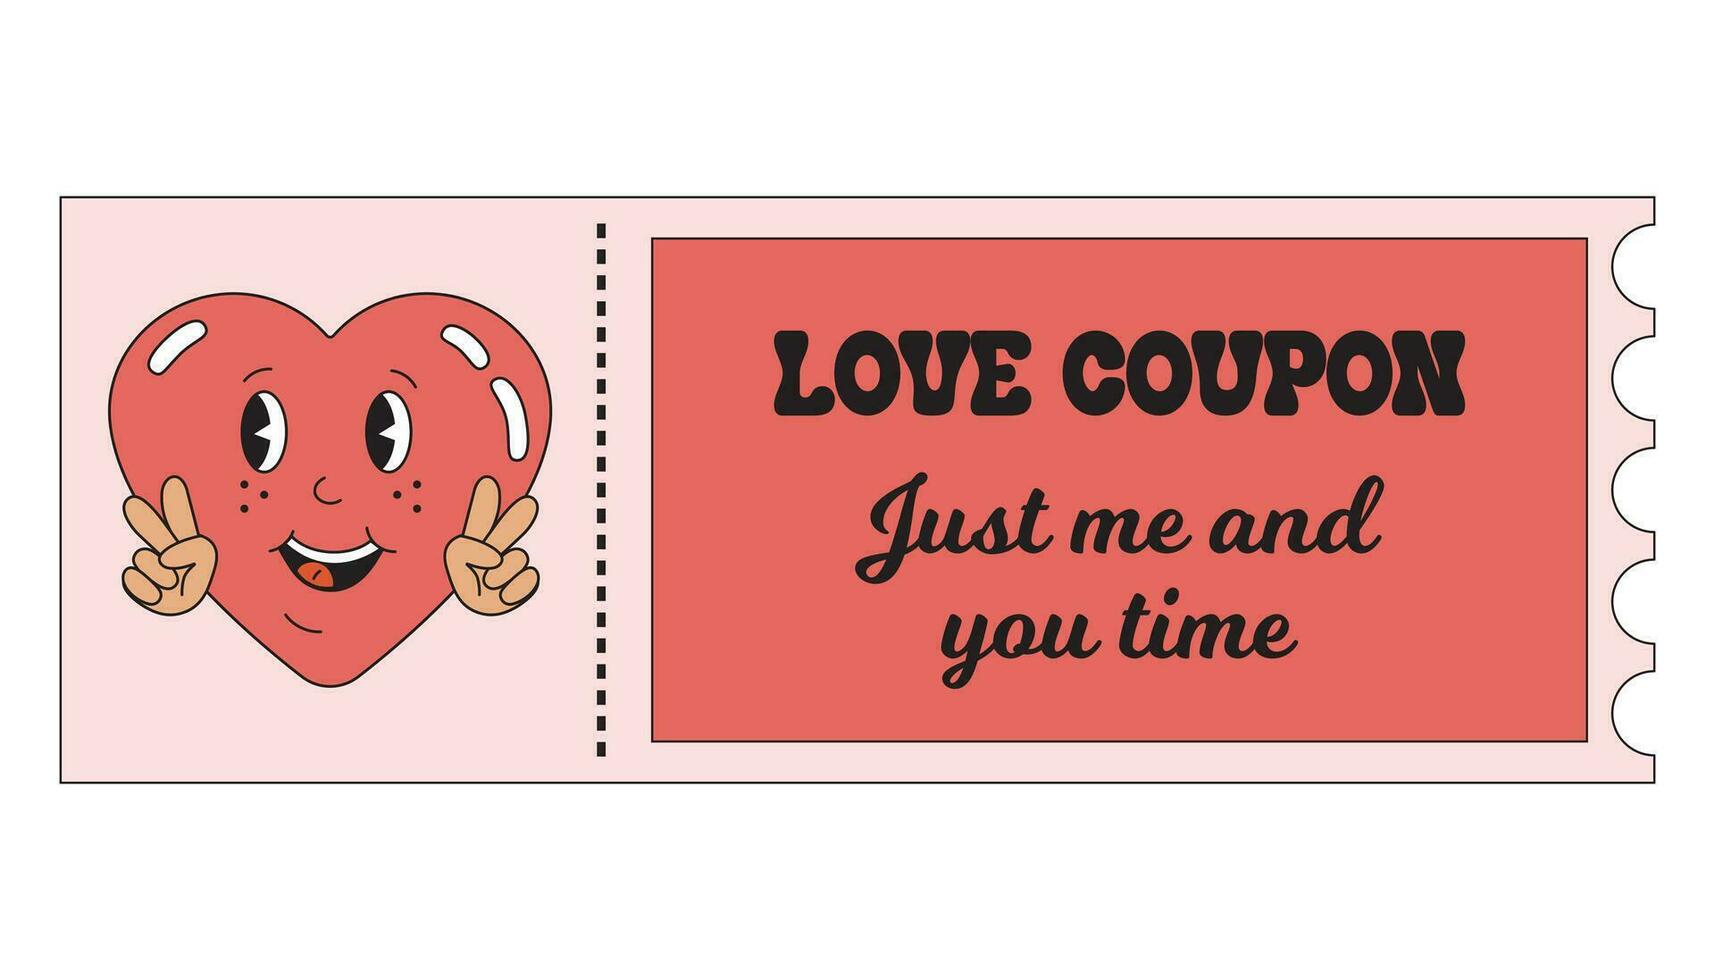 Love Coupon Valentines day. Love coupon just me and you time, romantic date in trendy retro style for boyfriend or girlfriend. Valentine gift, surprise and present for couples. vector